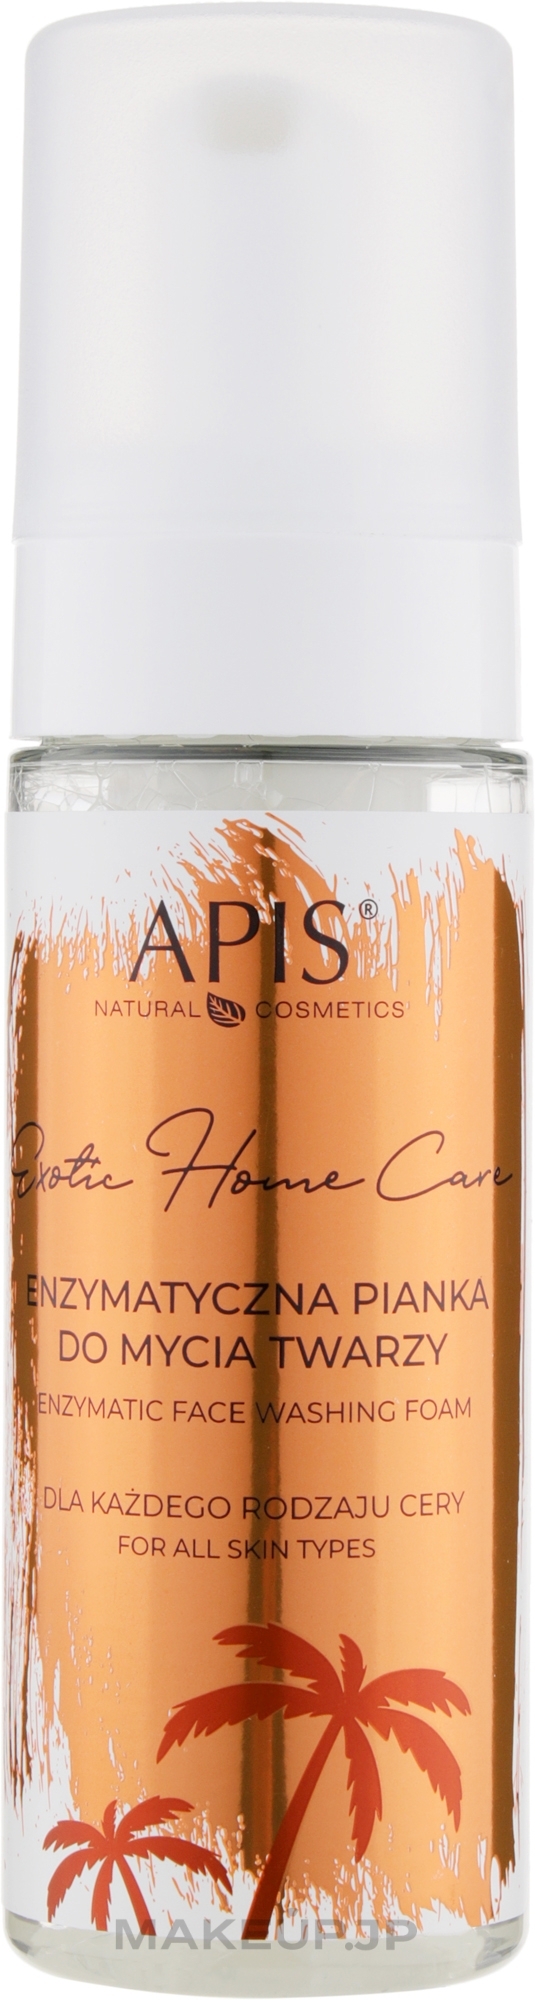 Cleansing Foam - Apis Professional Exotic Home Care — photo 150 ml